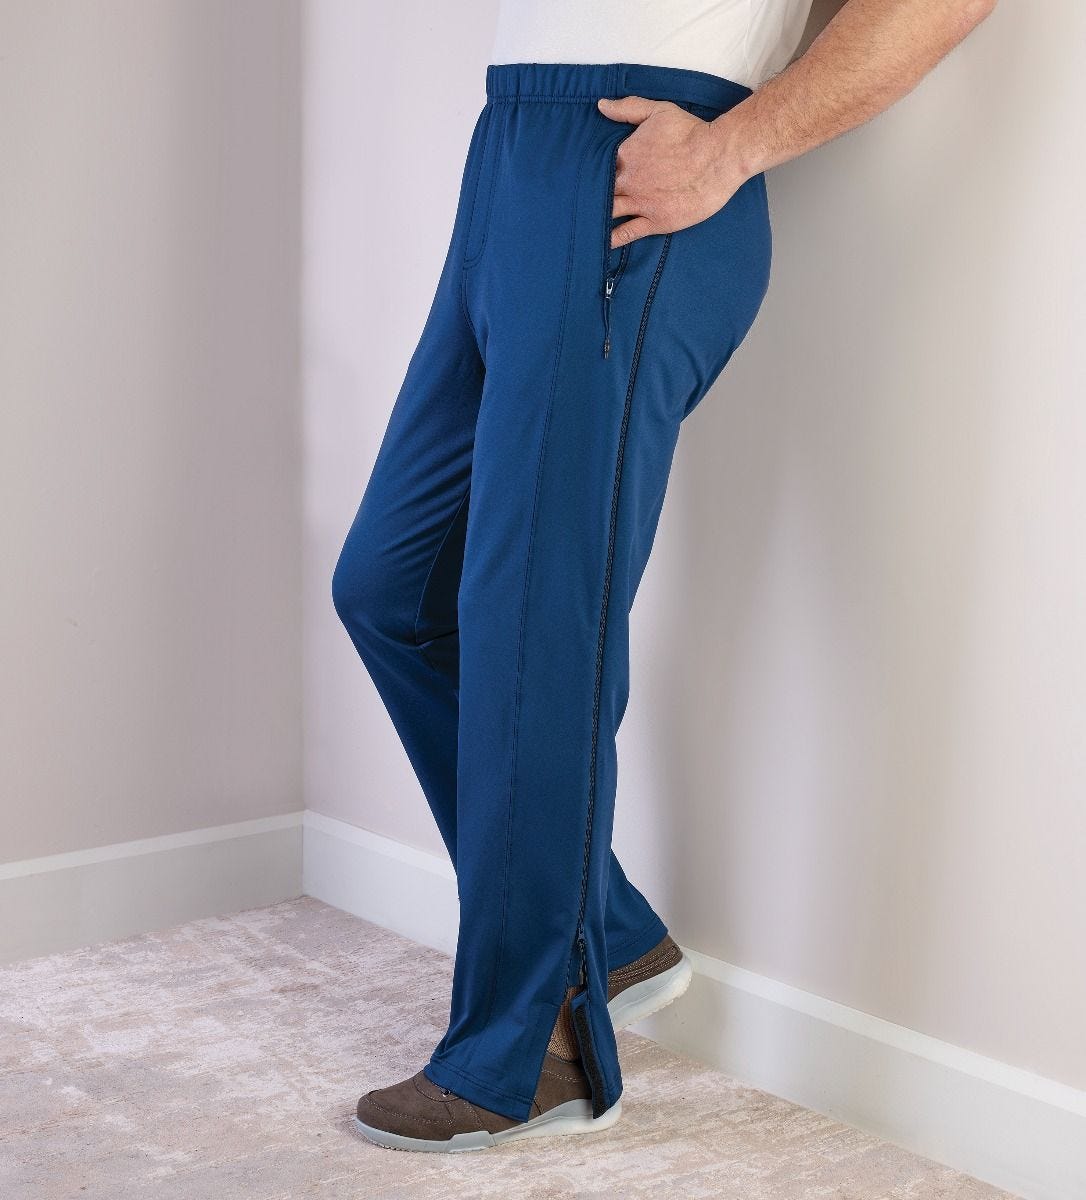 Unisex Recovery Pants with Side Zippers